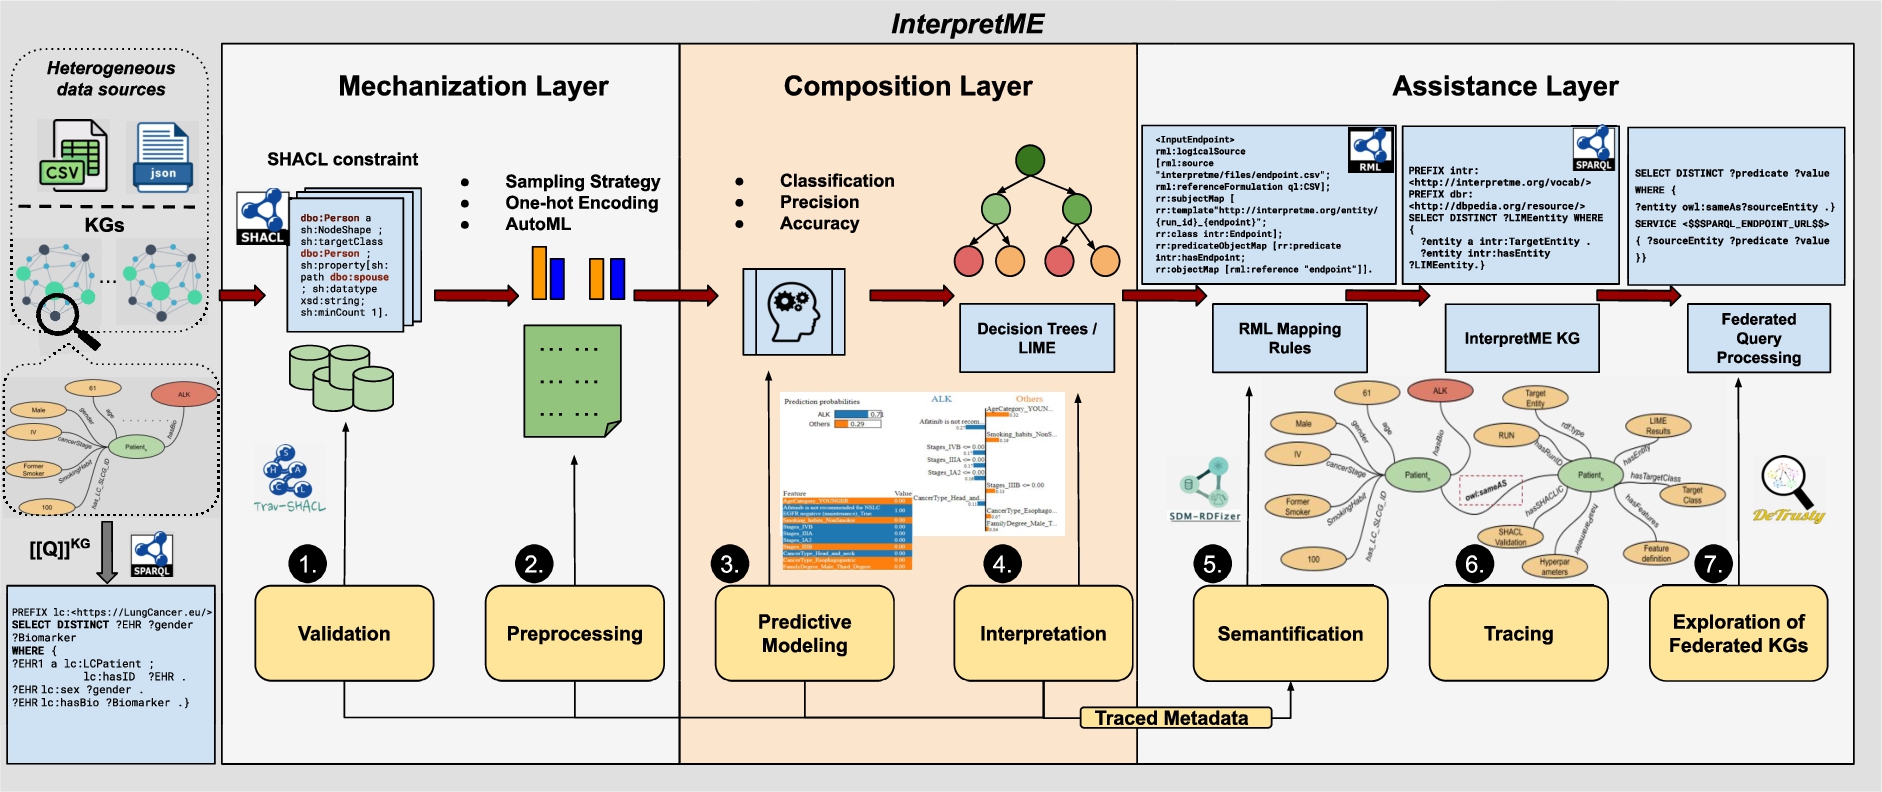 The InterpretME Architecture. The input of InterpretME is either Knowledge graphs or datasets in formats, i.e., CSV, and JSON. In Mechanization layer, SHACL validation, data preprocessing, and AutoML are utilized. The Composition layer performs the predictive task, and the interpretable tools like Decision trees and LIME are implemented for understanding the predictions. In Assistance layer, InterpretME generates an InterpretME KG with the traced metadata of the trained predictive model, to provide users with more enhanced and reliable interpretations. Generating and Exploiting the InterpretME KG involves RML mappings and Federated Query Processing.